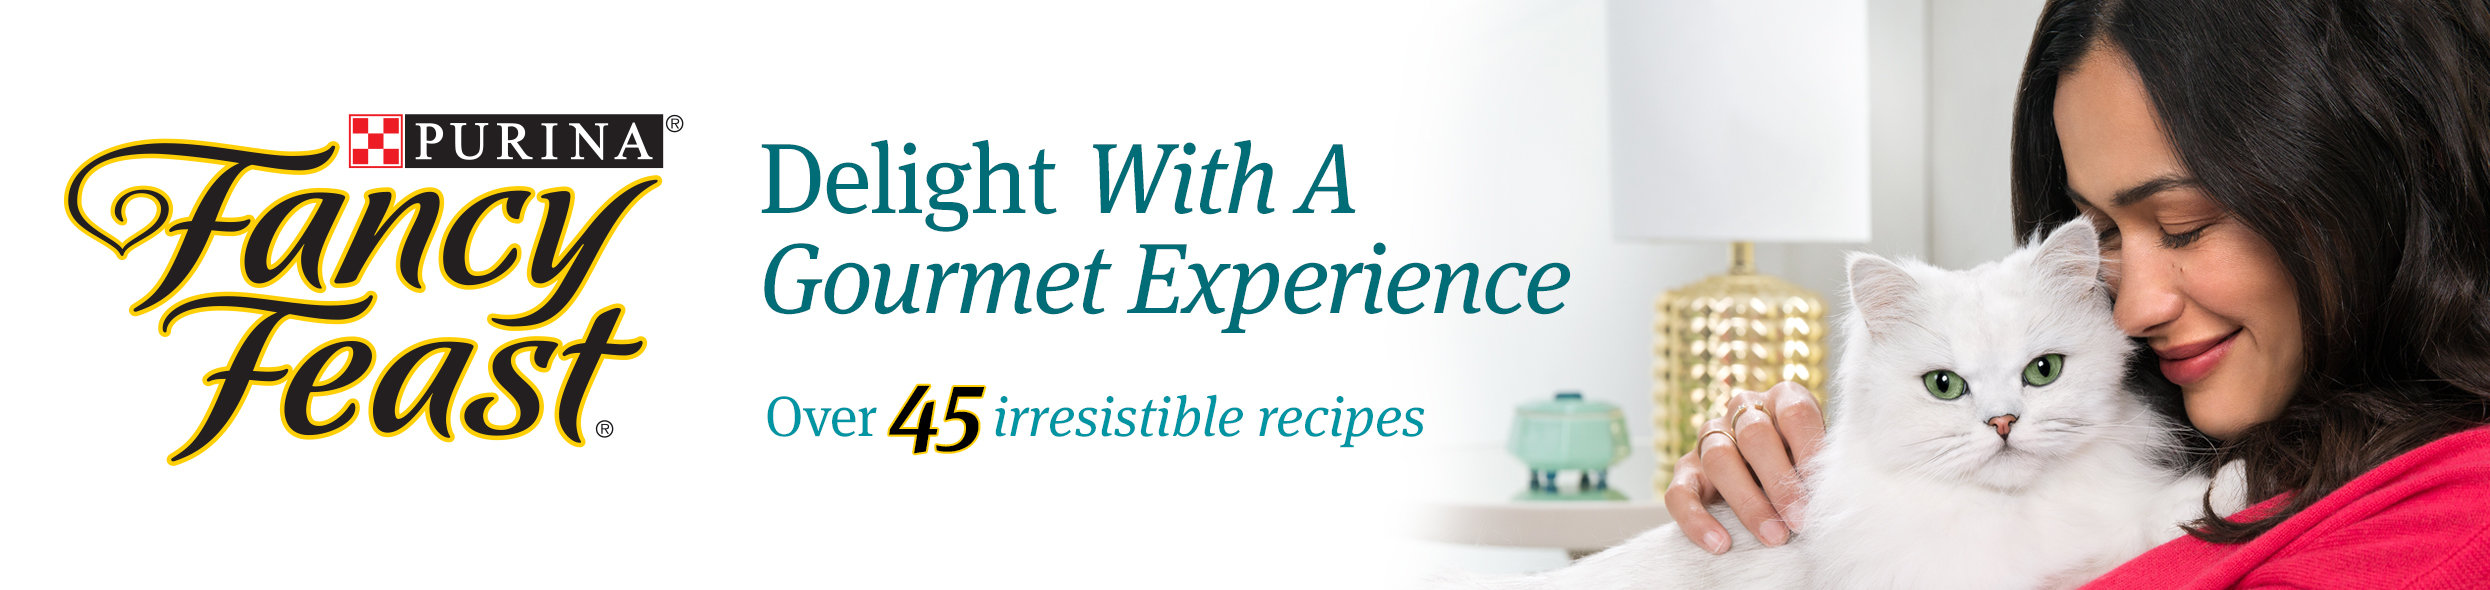 Purina Fancy Feast Delight With A Gourmet Experience Over 45 irresistible recipes